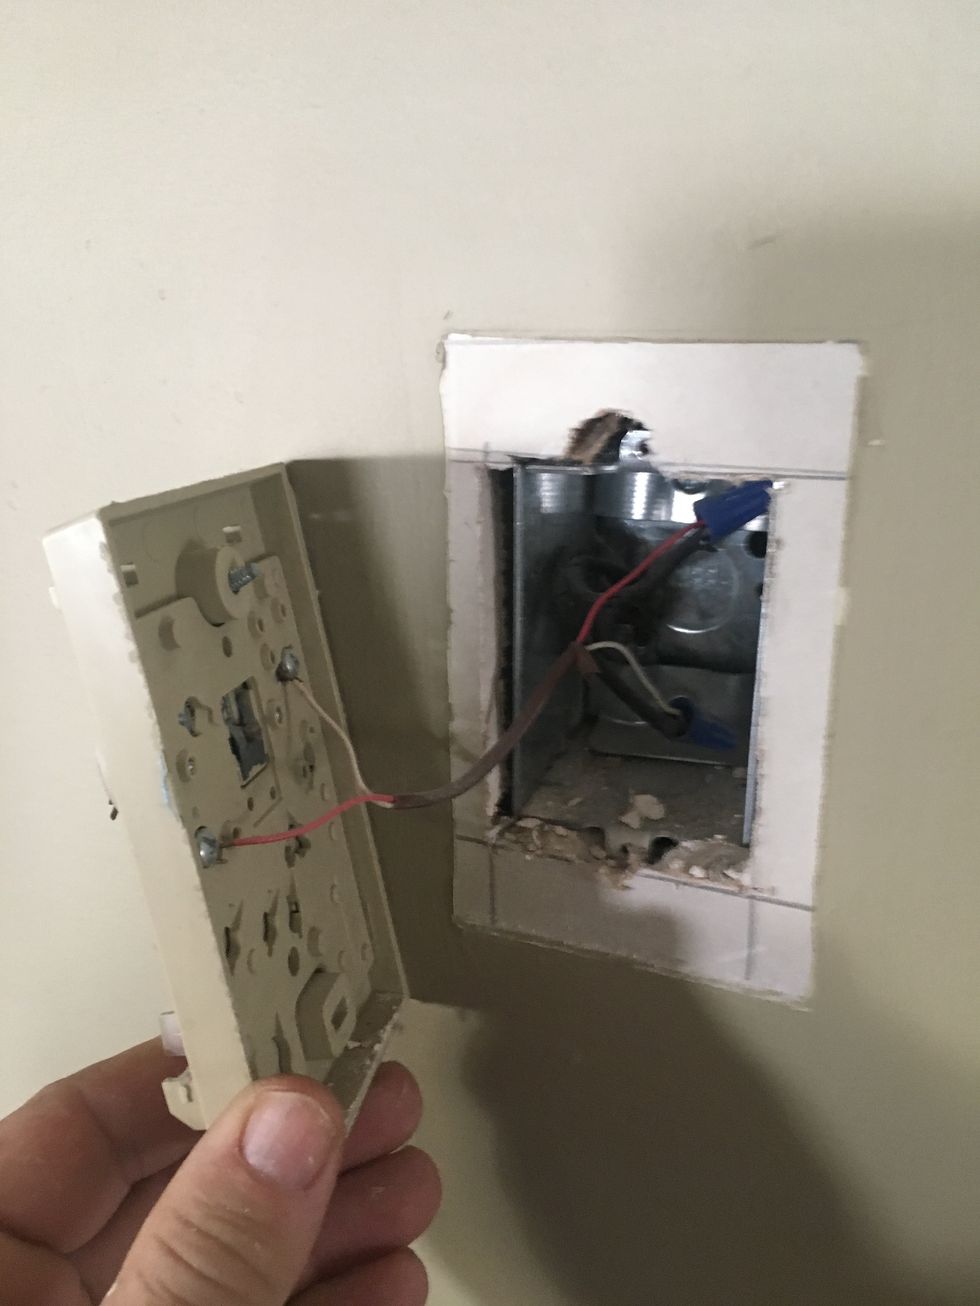 how to find out if your old thermostat has a C-Wire, take it off the wall and see how many wires it uses.